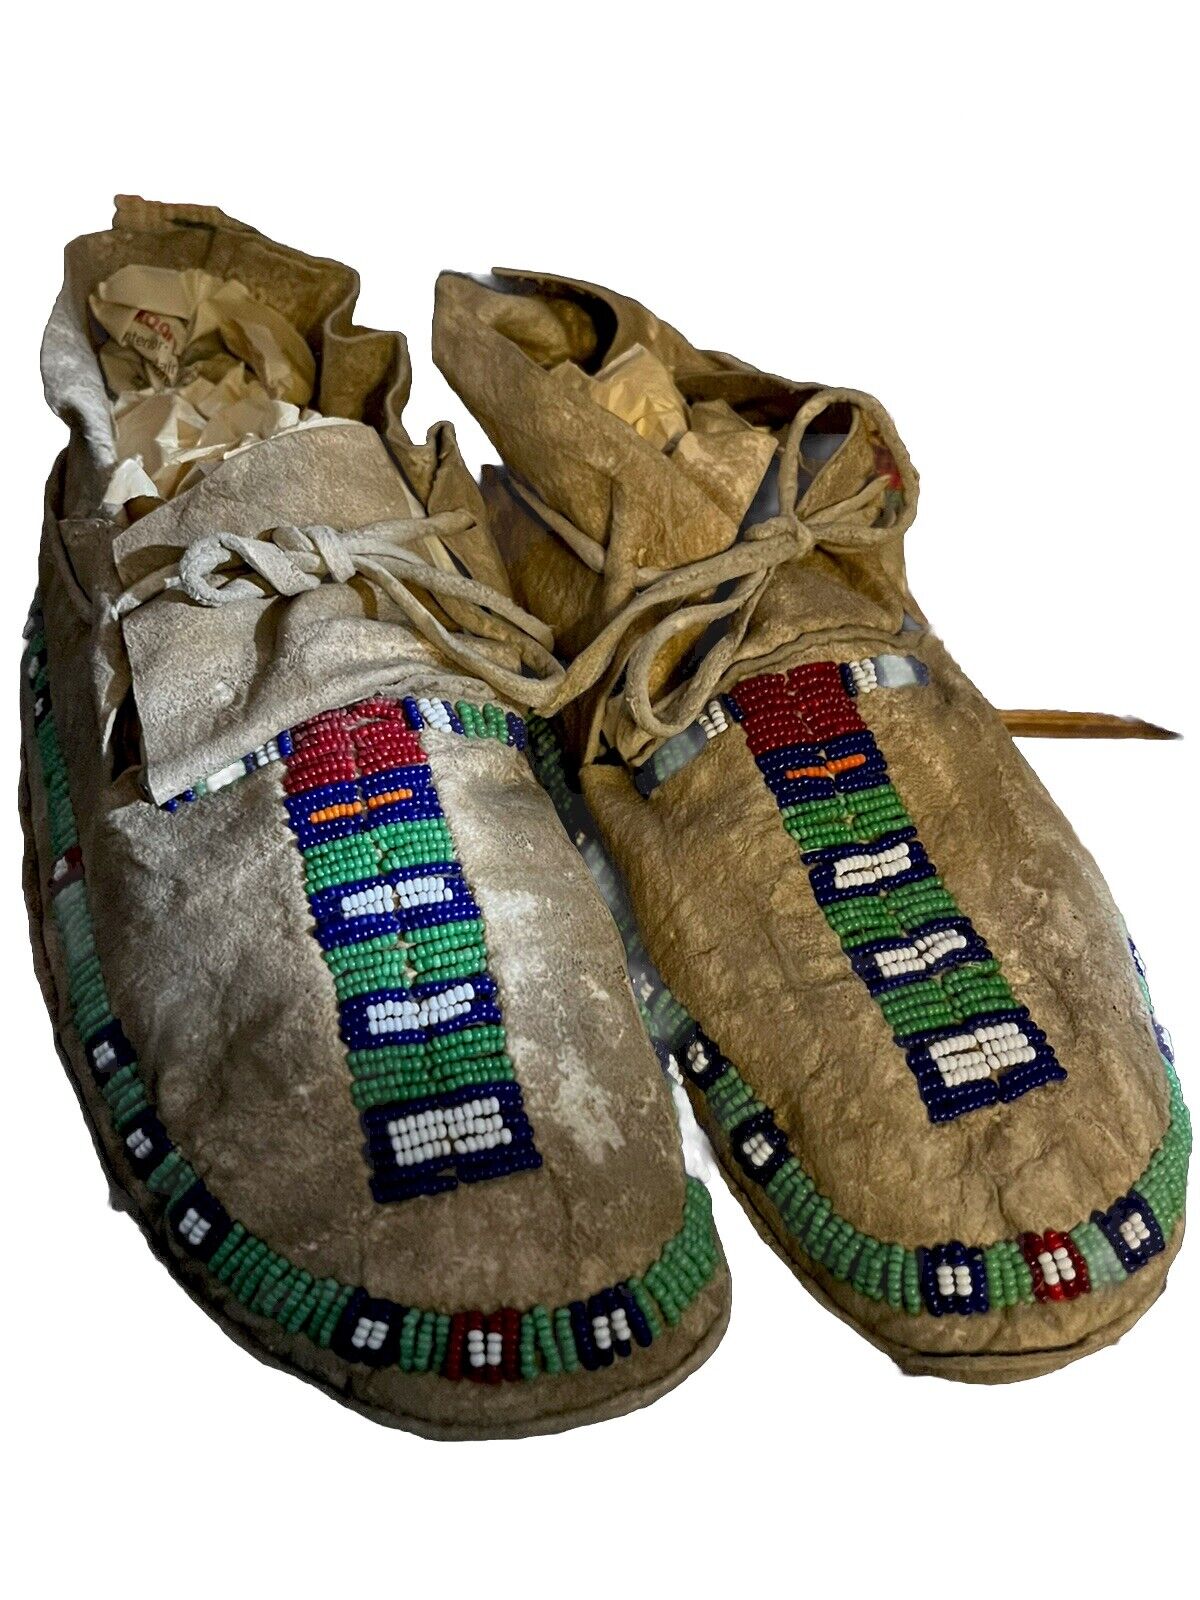 Vintage VERY NICE PAIR OF BEADED Native American SIOUX Indian MOCCASINS Shoes.